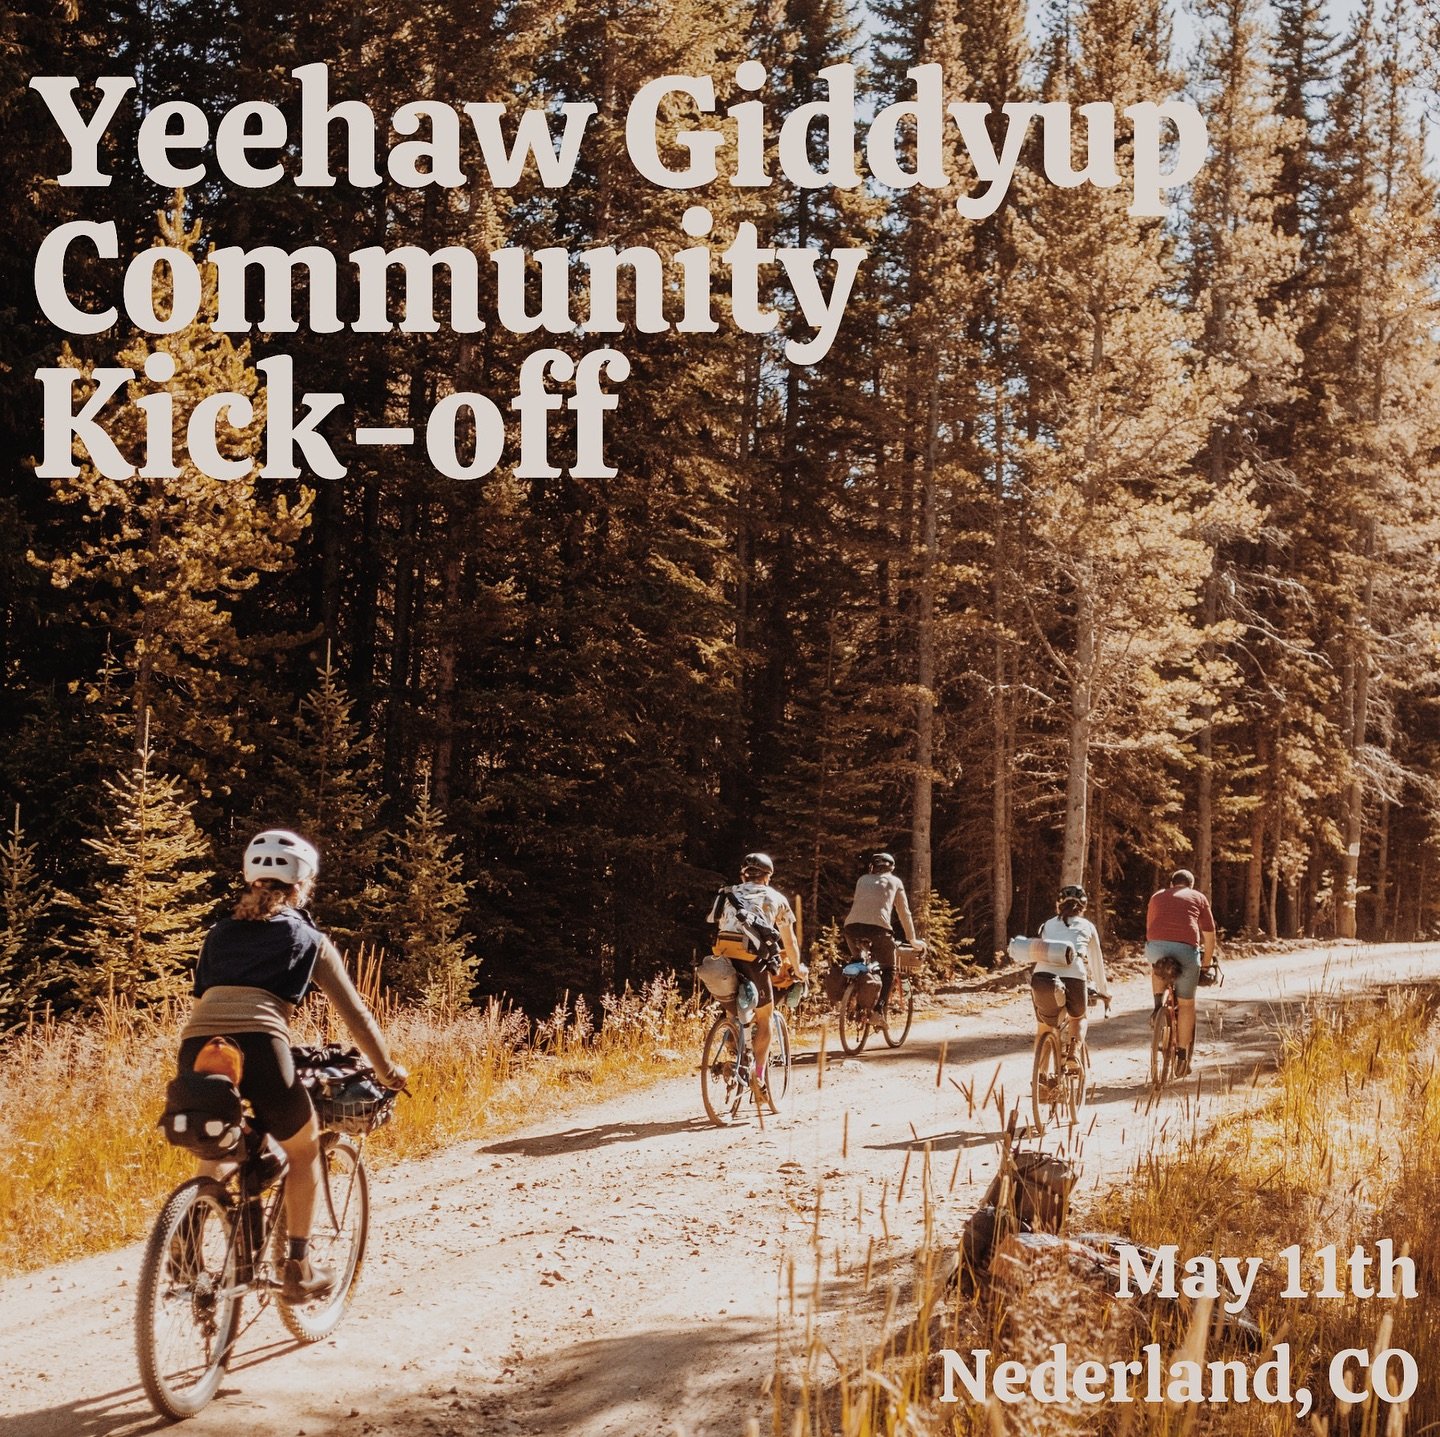 This Saturday, May 11th 4:30-6:00, join us and our friends over at @yeehaw.giddyup for a bikepacking season kick-off party! We&rsquo;ll have snacks and beverages available and we&rsquo;ll get to learn about what fun plans they have for the summer. @t